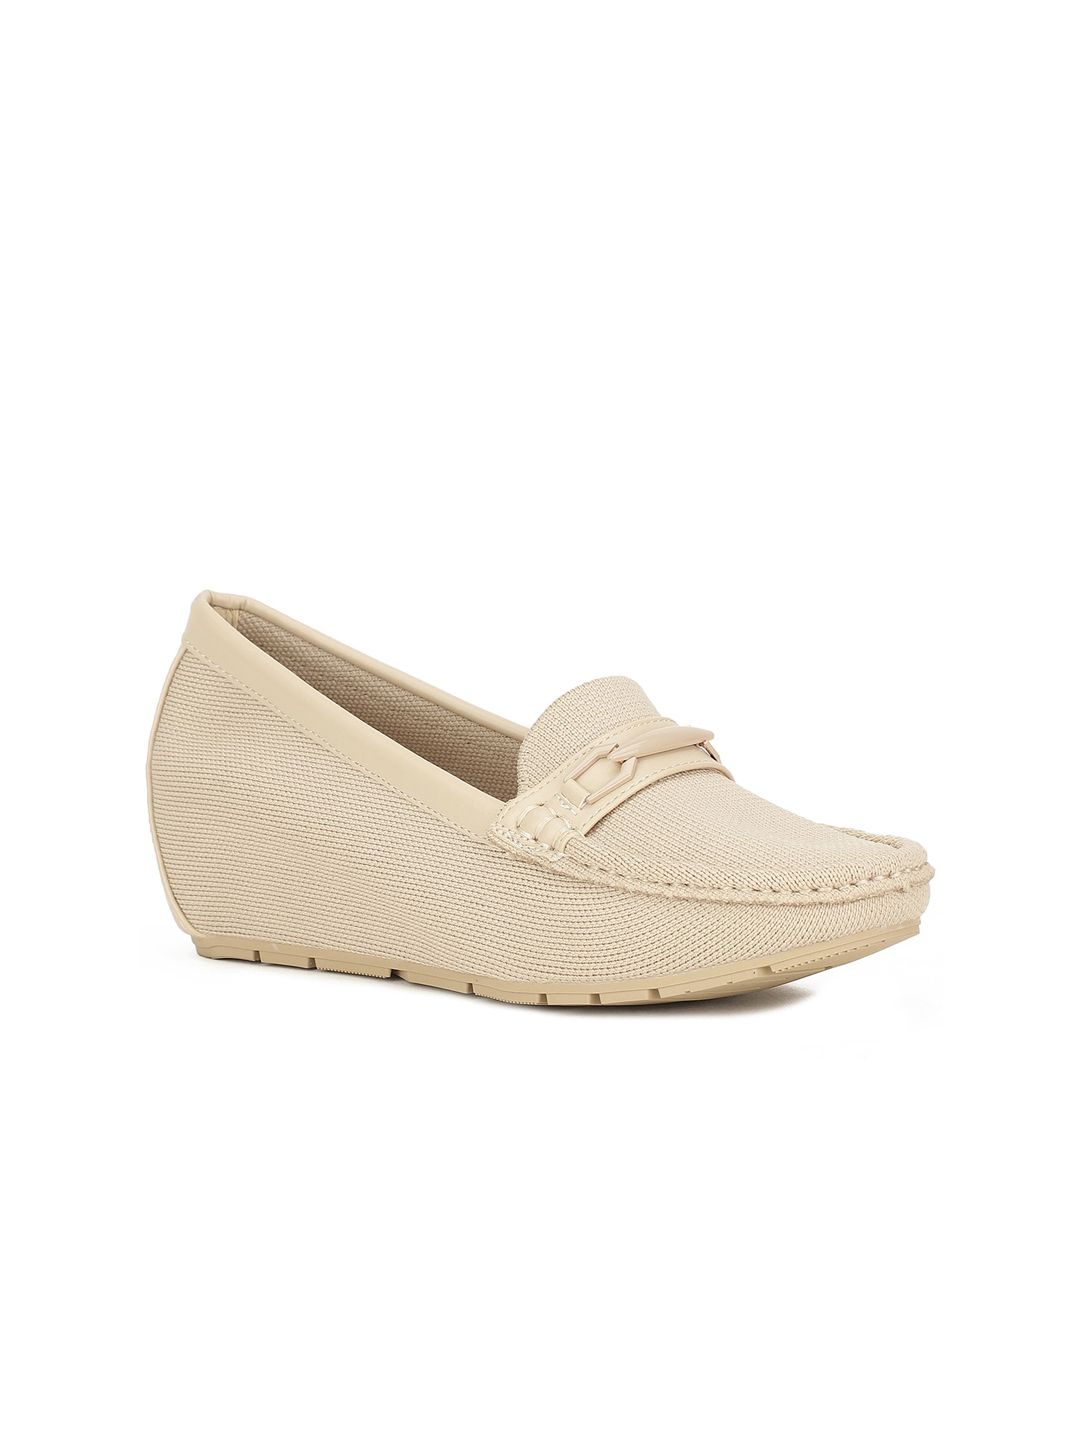 Bata Women Nude-Coloured Perforations PU Loafers Price in India